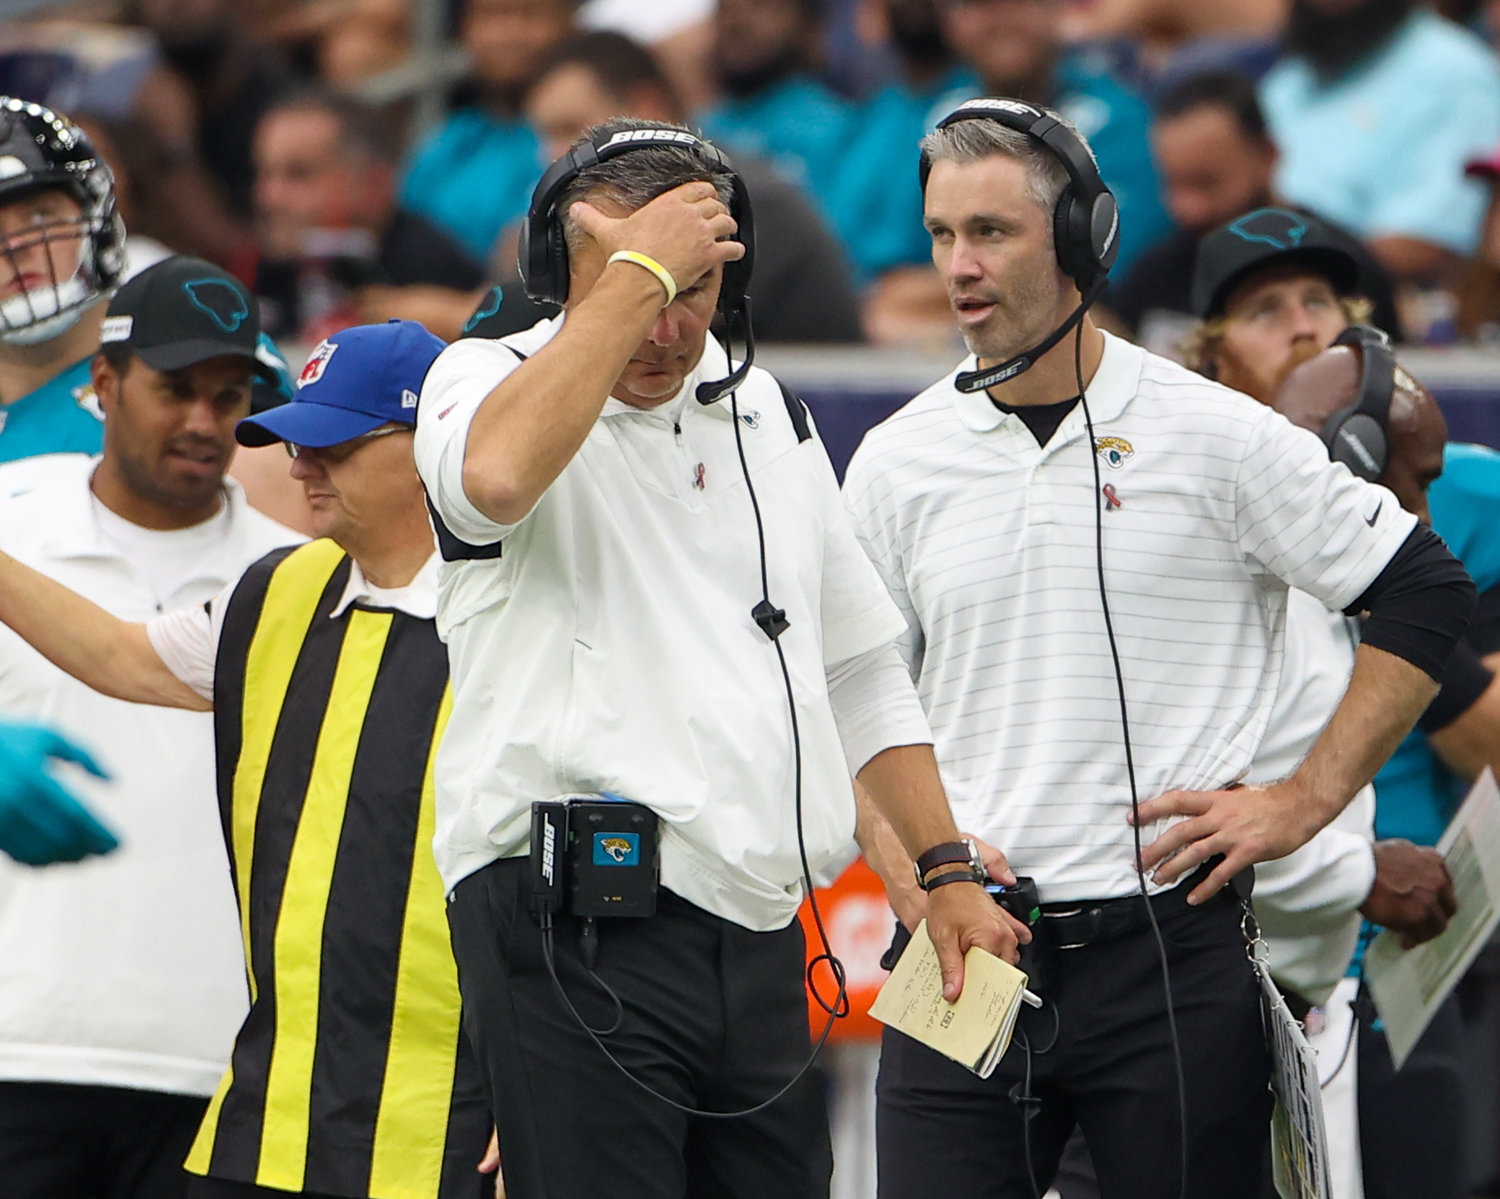 Jacksonville Jaguars head coach Urban Meyer reacts after quarterback Trevor Lawrence overthrows a receiver during the second half of an NFL game between the Houston Texans and the Jacksonville Jaguars on September 12, 2021 in Houston, Texas.